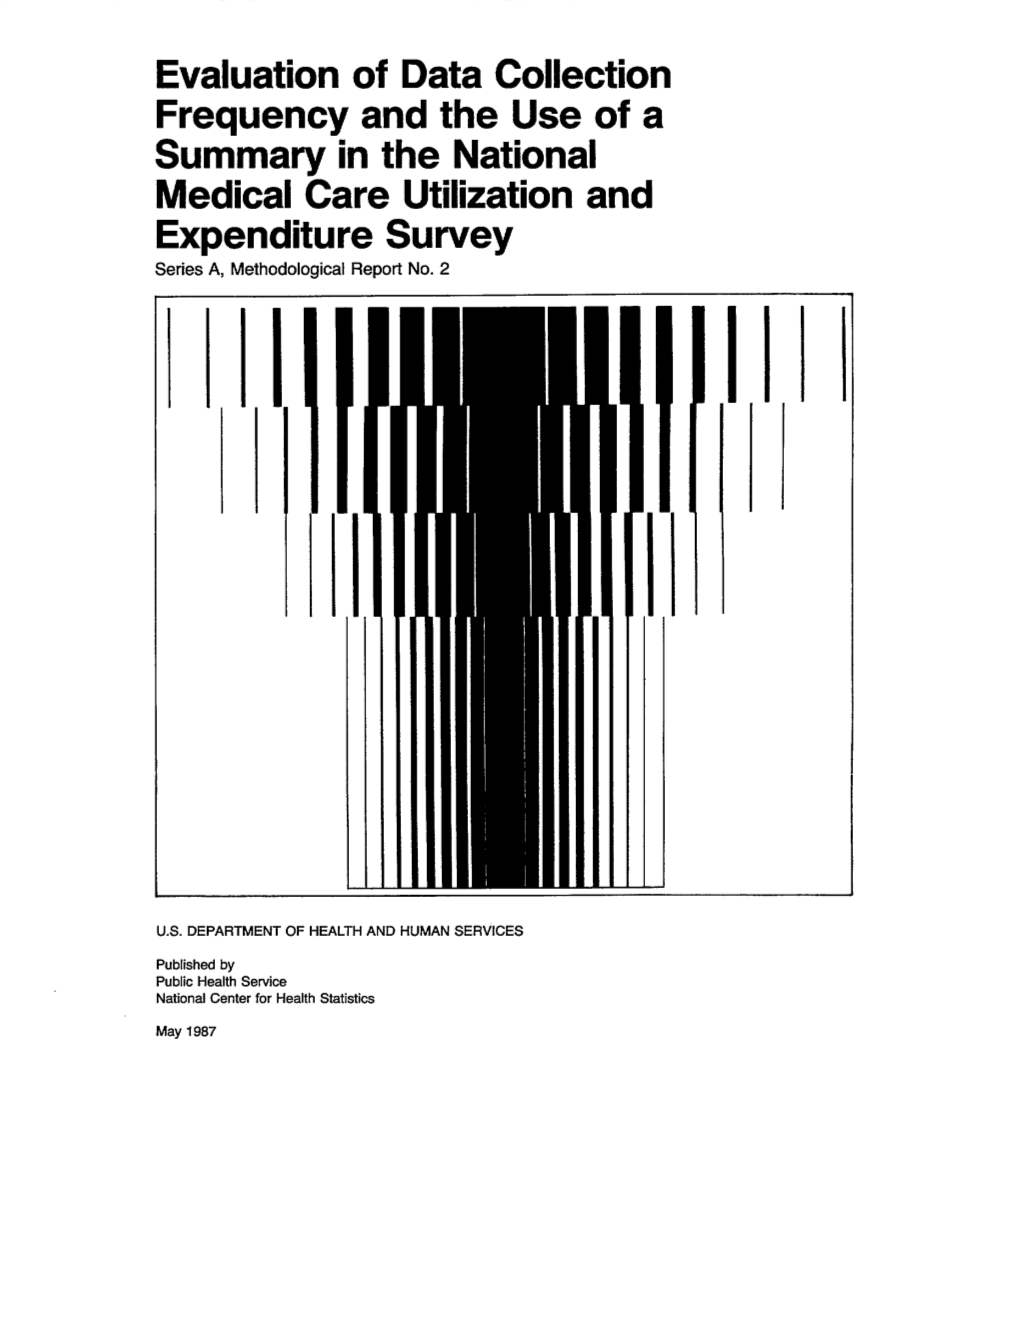 Evaluation of Data Collection Frequency and the Use of a Summary in the National Medical Care Utilization and Expenditure Survey Series A, Methodological Report No